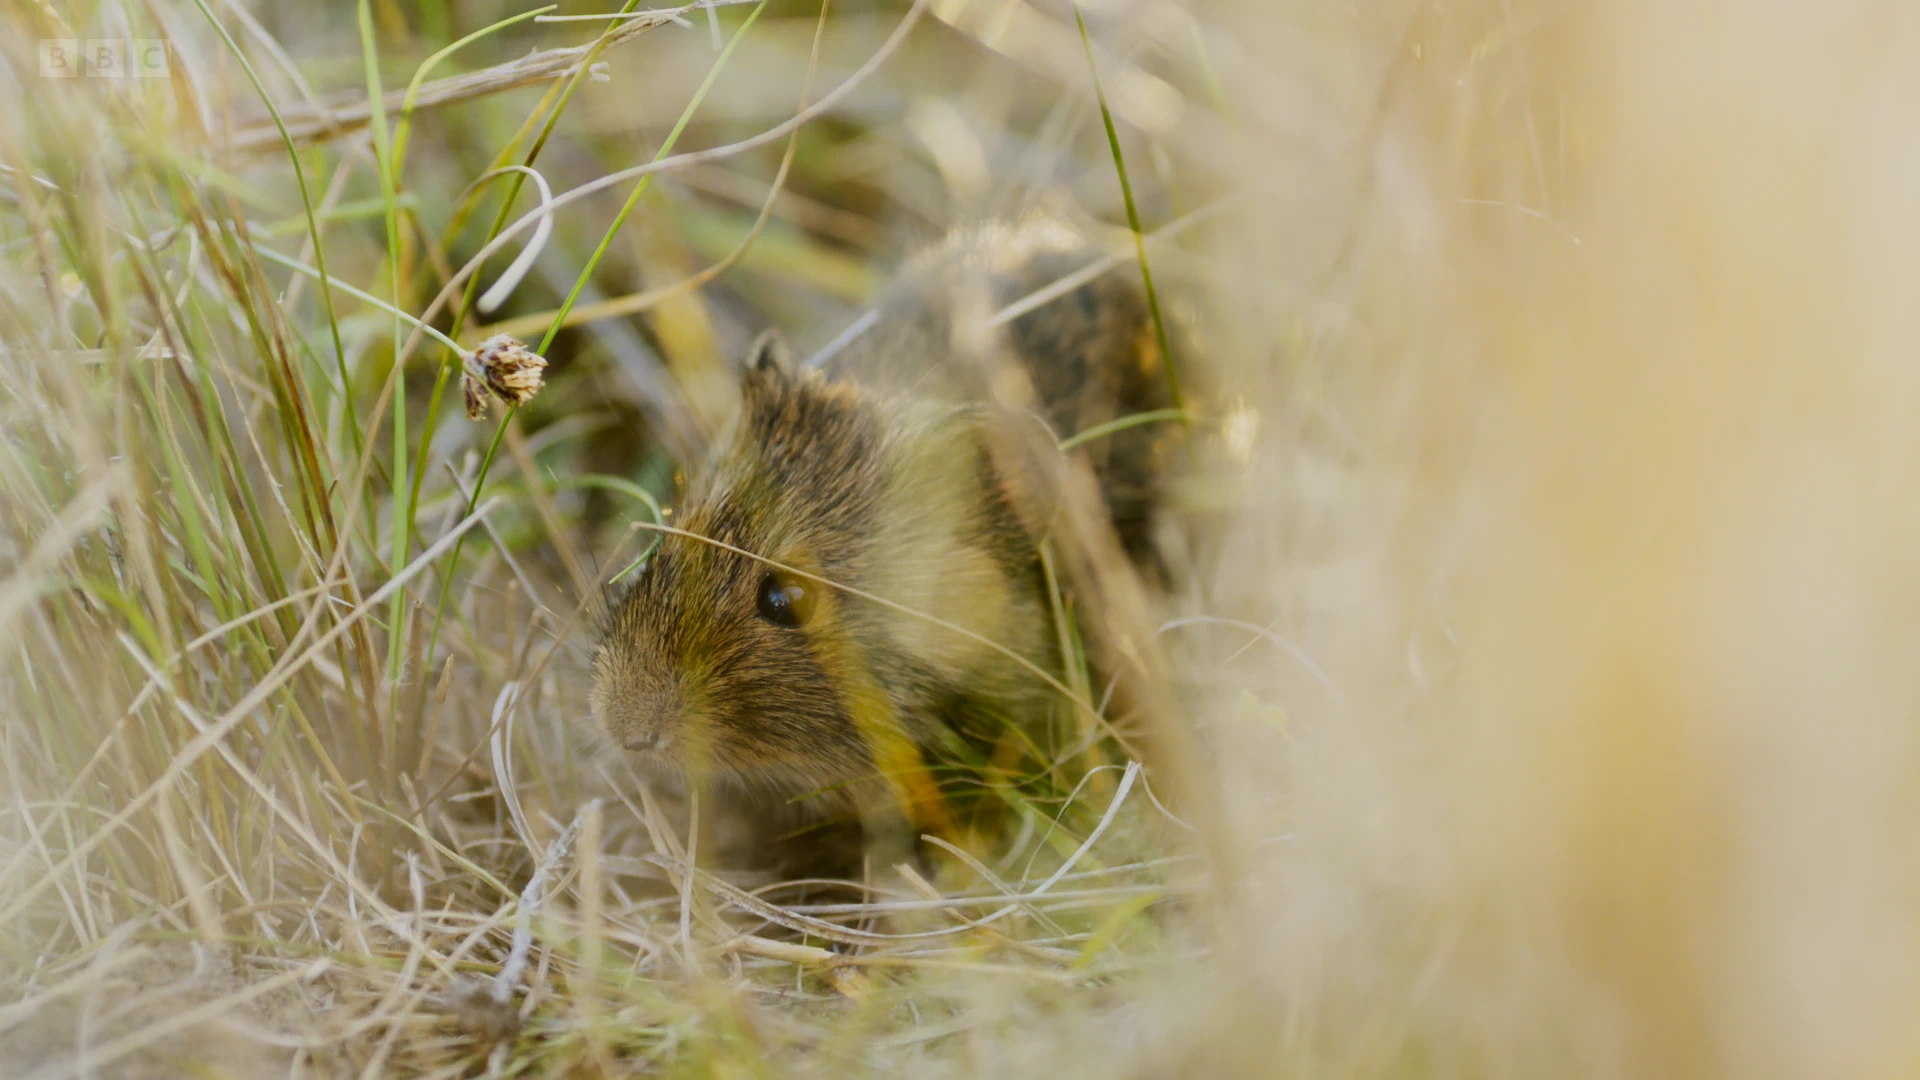 Southern African vlei rat (Otomys irroratus) as shown in Planet Earth II - Grasslands